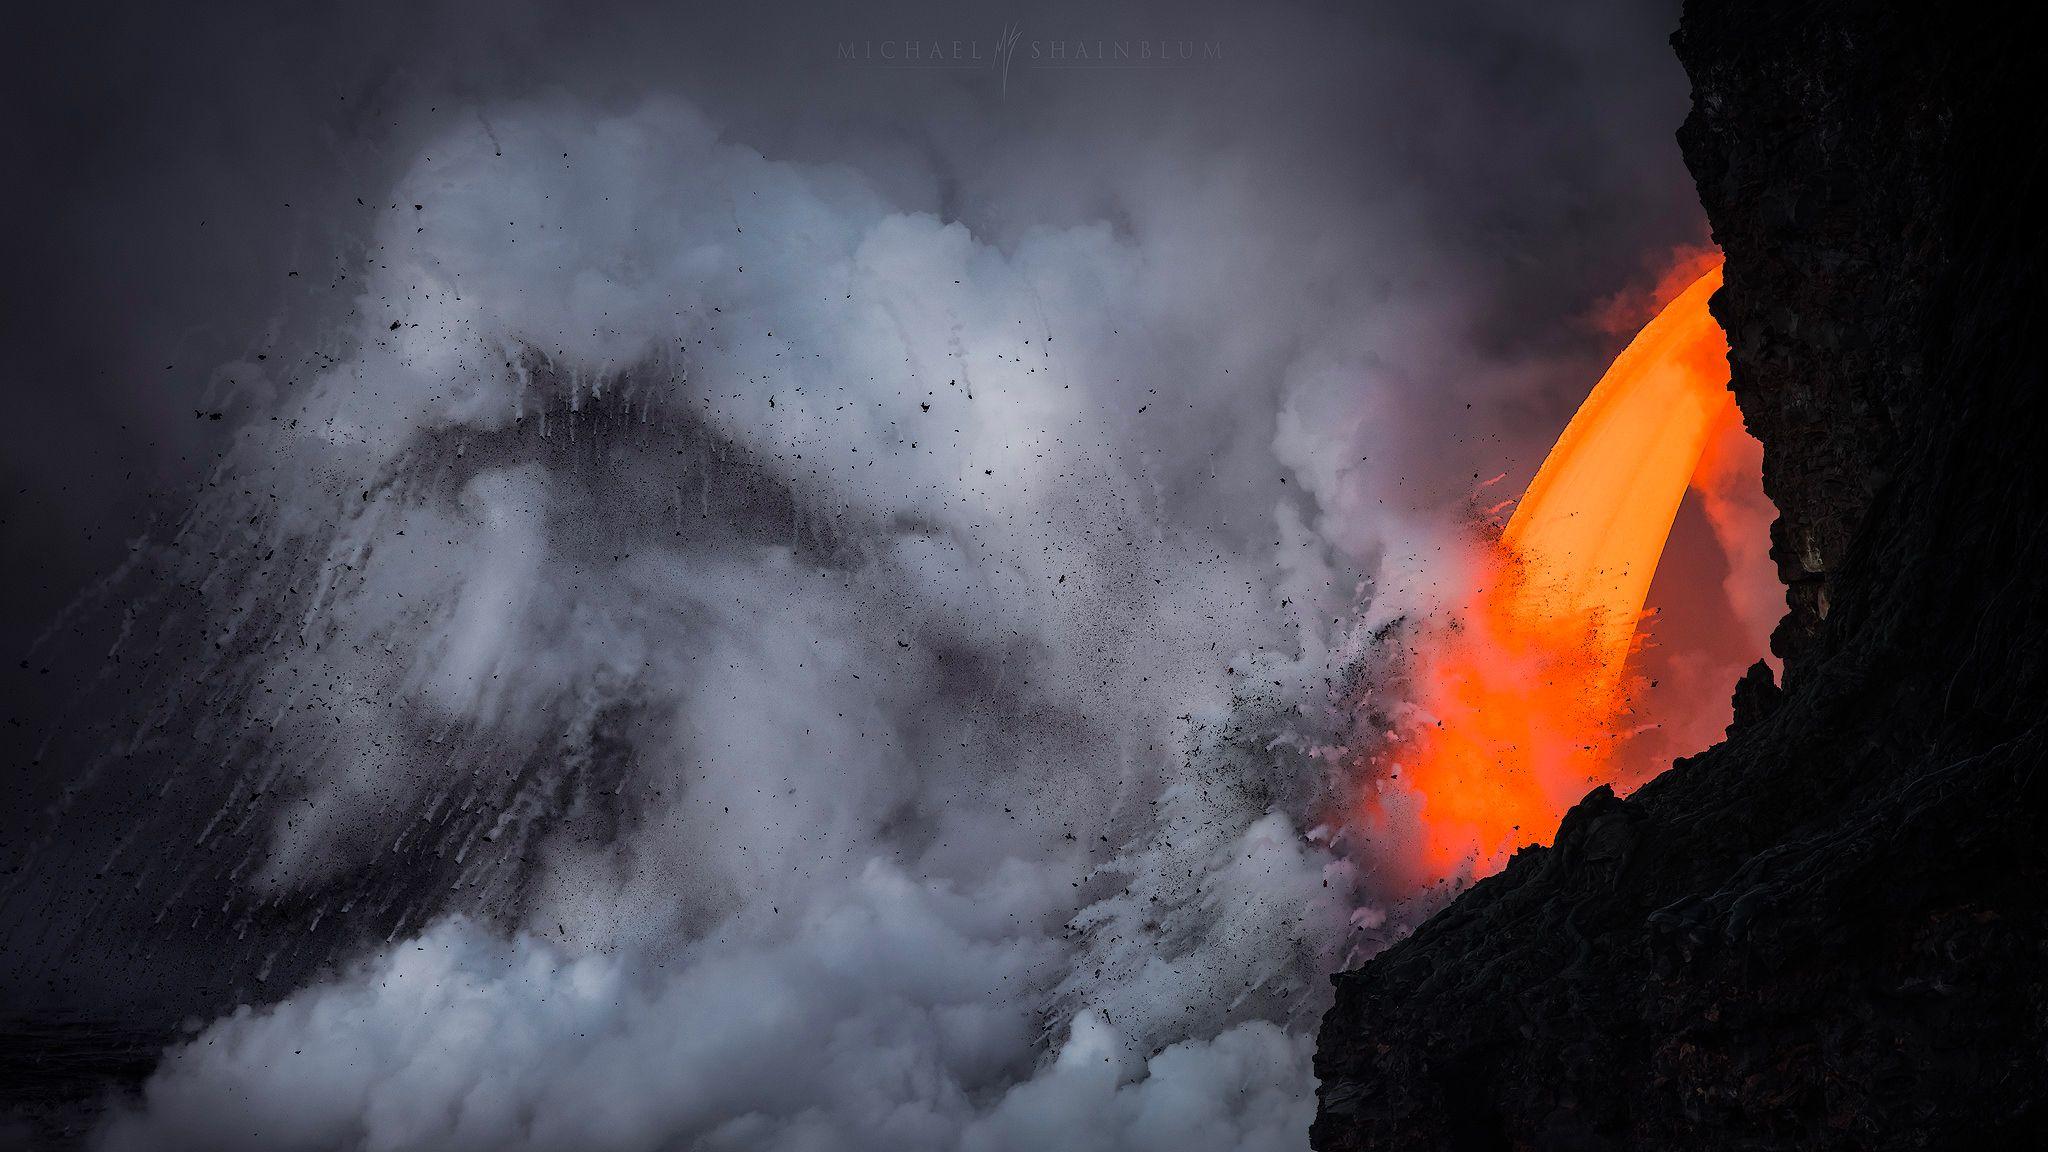 Magnificent Image of Spewing Lava in Hawaii